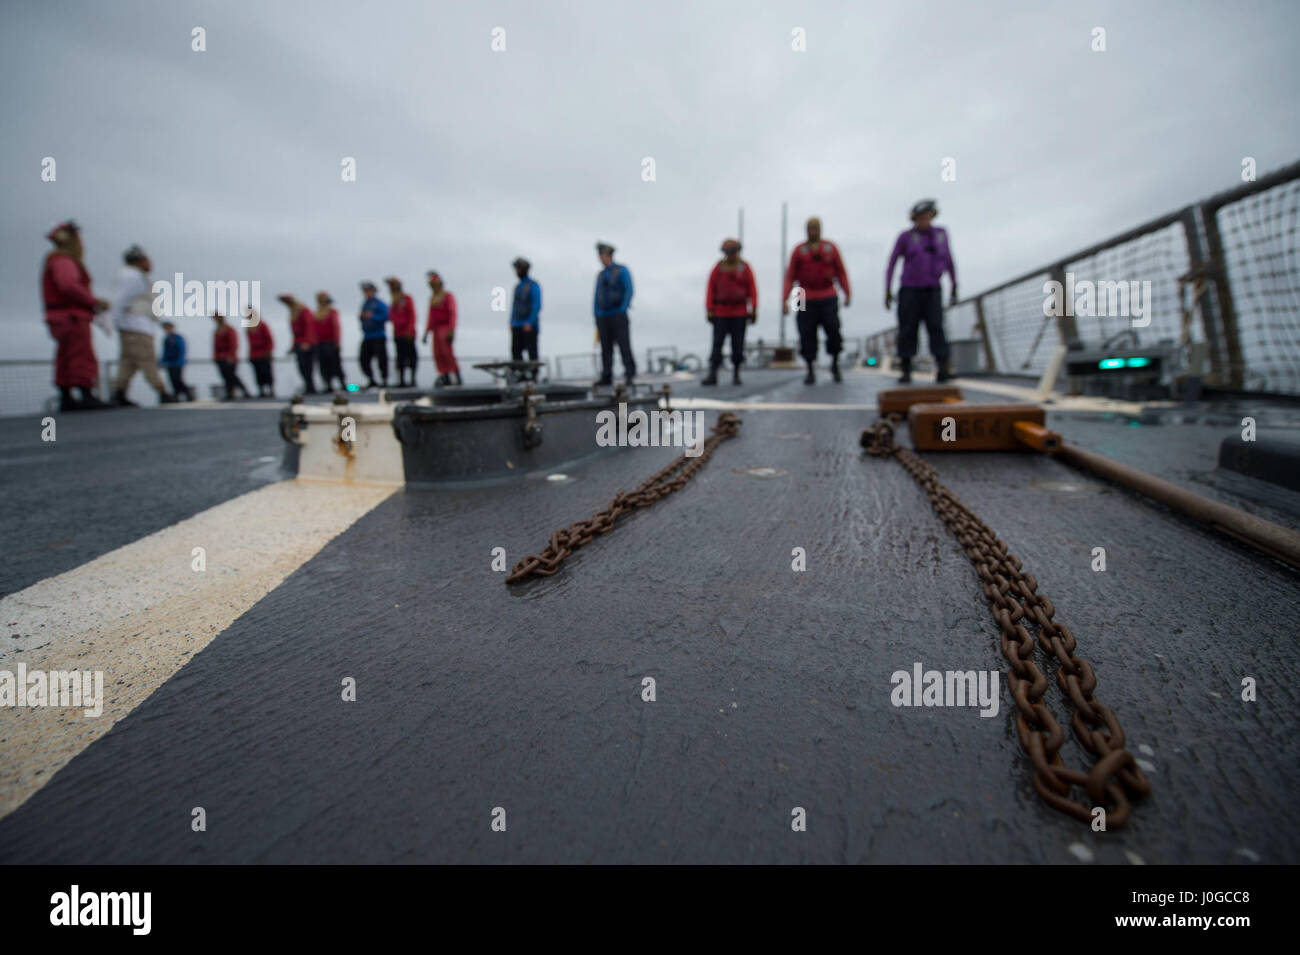 170331-N-ZE250-073   ATLANTIC OCEAN - (March 31, 2017) - Sailors aboard USS Carney (DDG 64) conduct a foreign object and debris walk down during flight quarters while the ship participates in exercise Joint Warrior 17-1 March 31, 2017. Carney, an Arleigh Burke-class guided-missile destroyer, forward-deployed to Rota, Spain, is conducting its third patrol in the U.S. 6th Fleet area of operations in support of U.S. national security interests in Europe. (U.S. Navy photo by Mass Communication Specialist 3rd Class Weston Jones/Released) Stock Photo